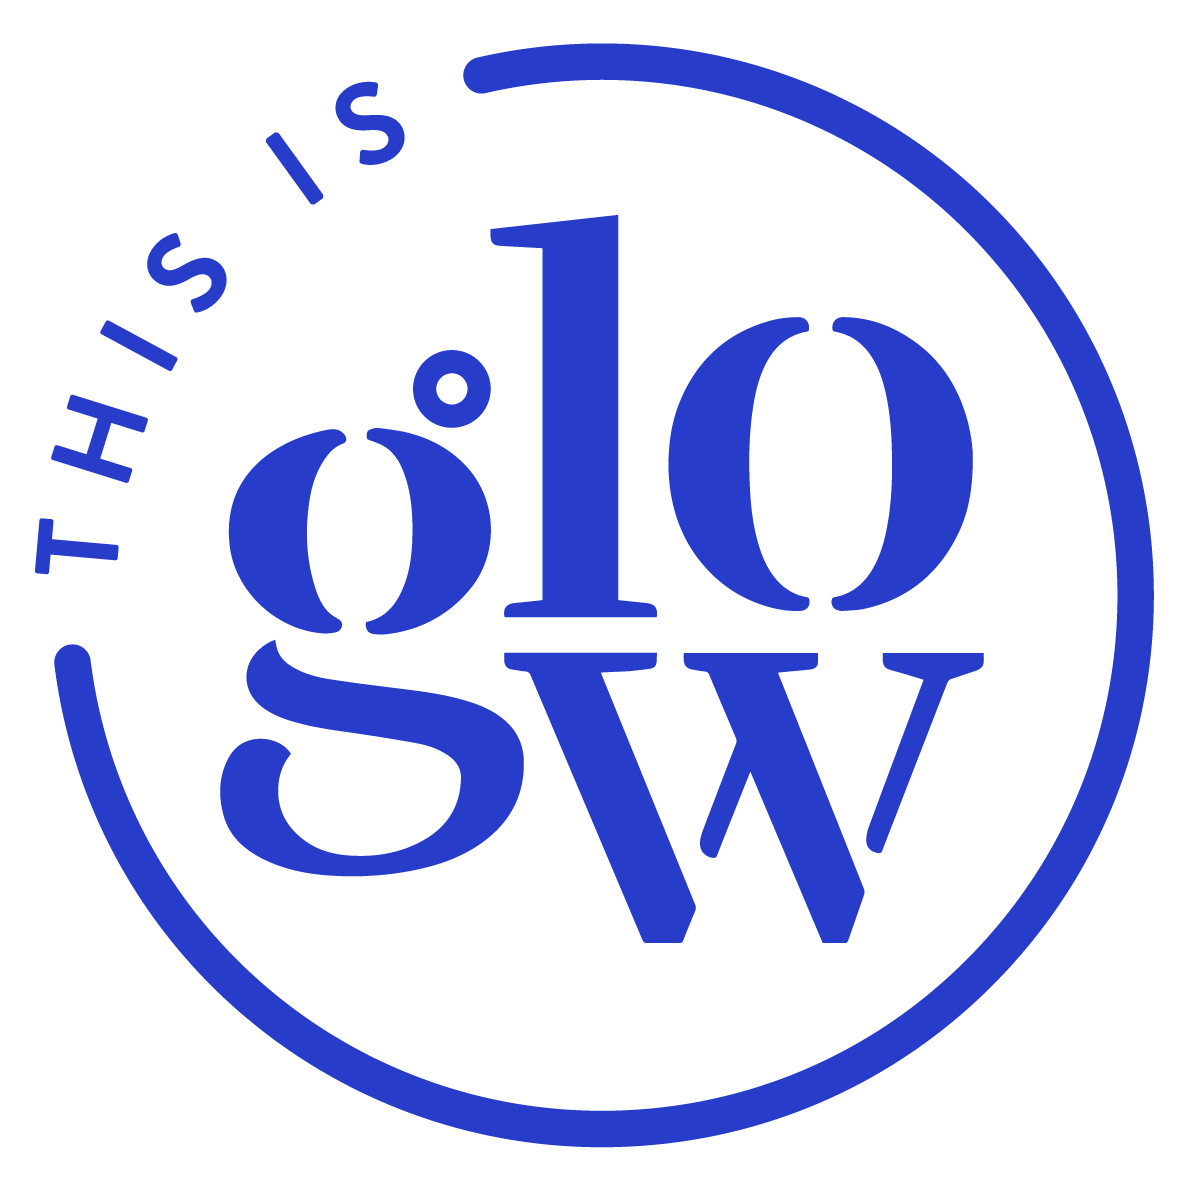 This is Glow